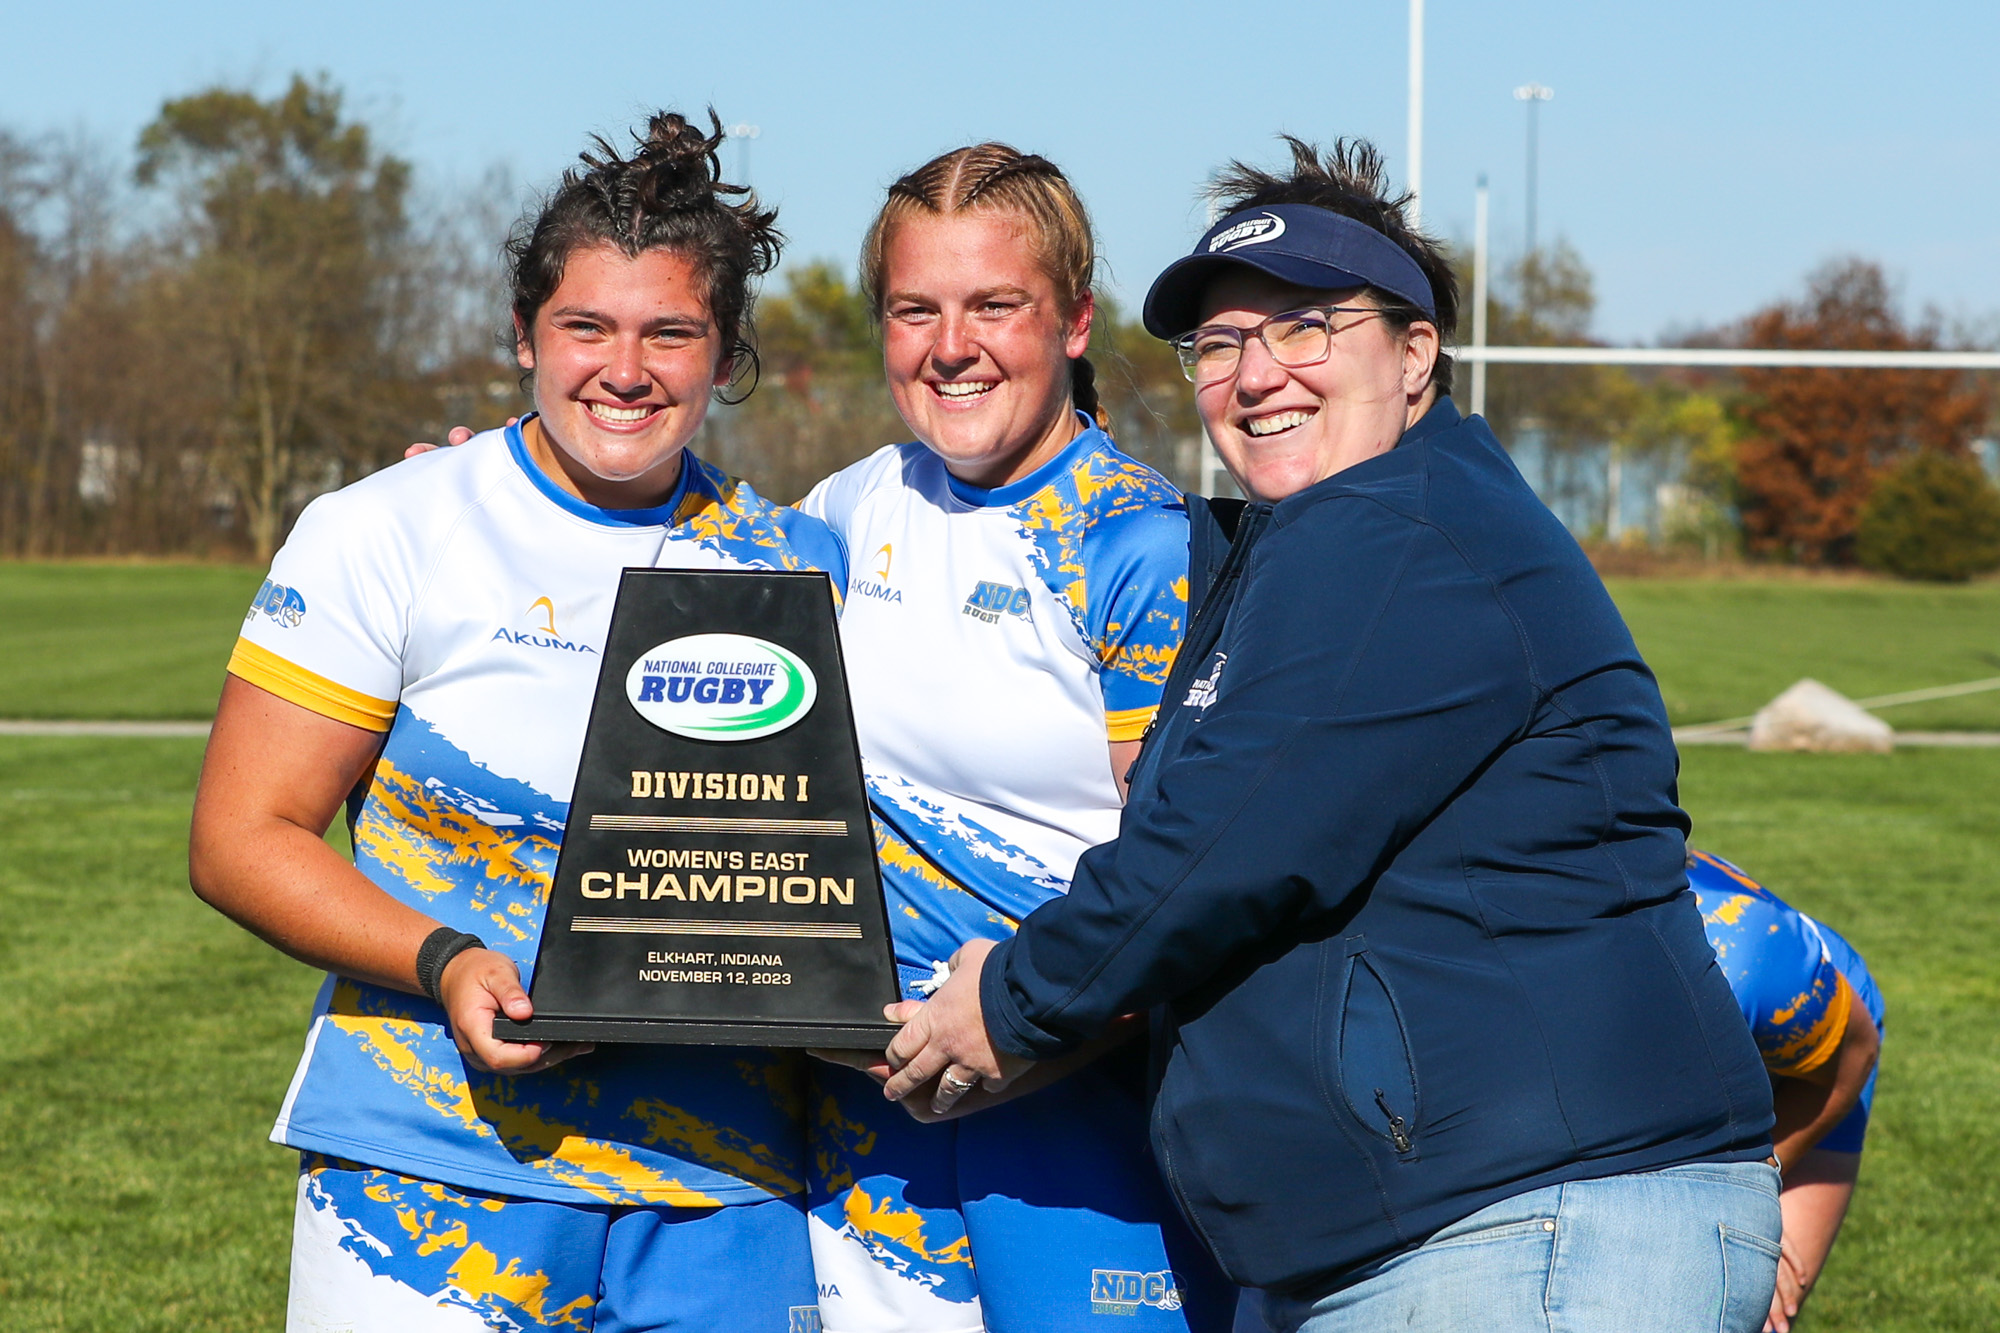 Notre Dame College rugby